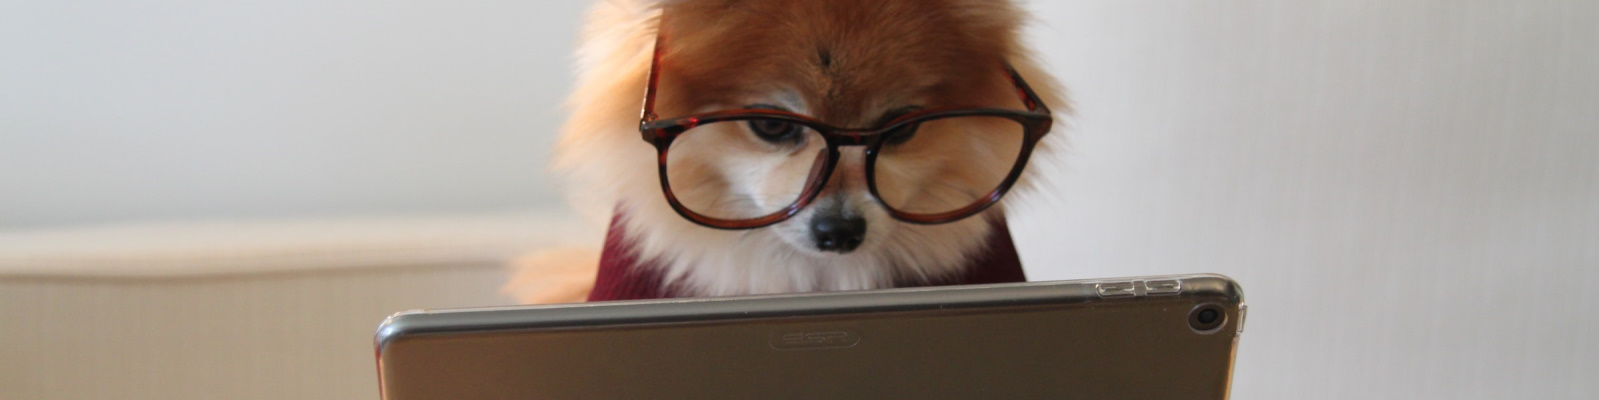 Fox with glasses looking at a monitor.